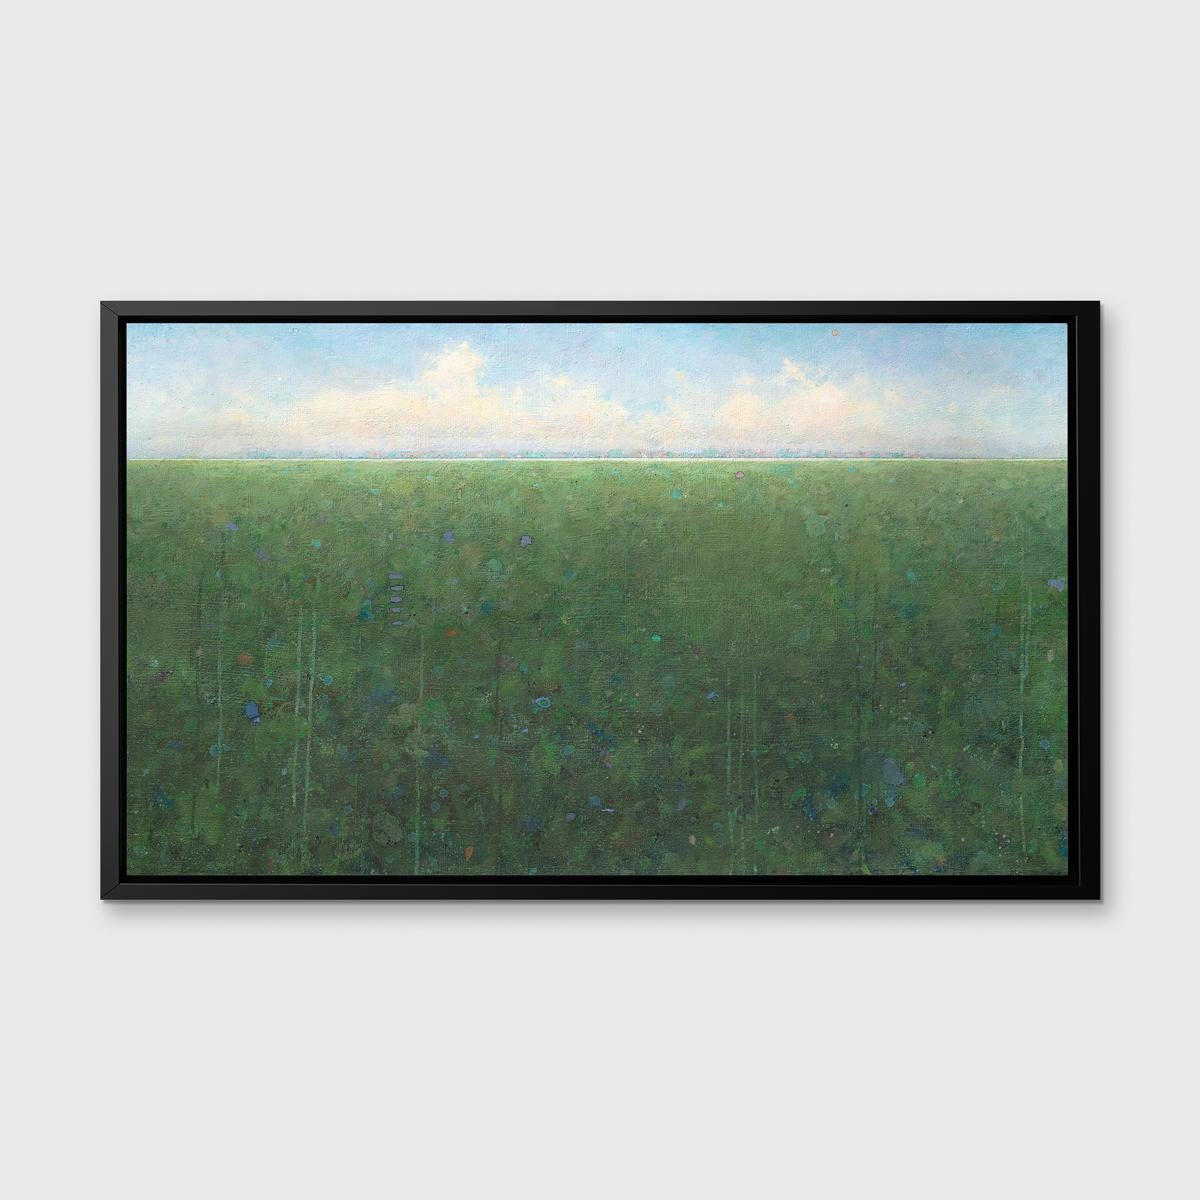 This abstract landscape limited edition print by Elwood Howell features the artist's signature high horizon line. Lush, green abstracted land extends the width of the composition, with colorful accents throughout, adding depth and visual texture.